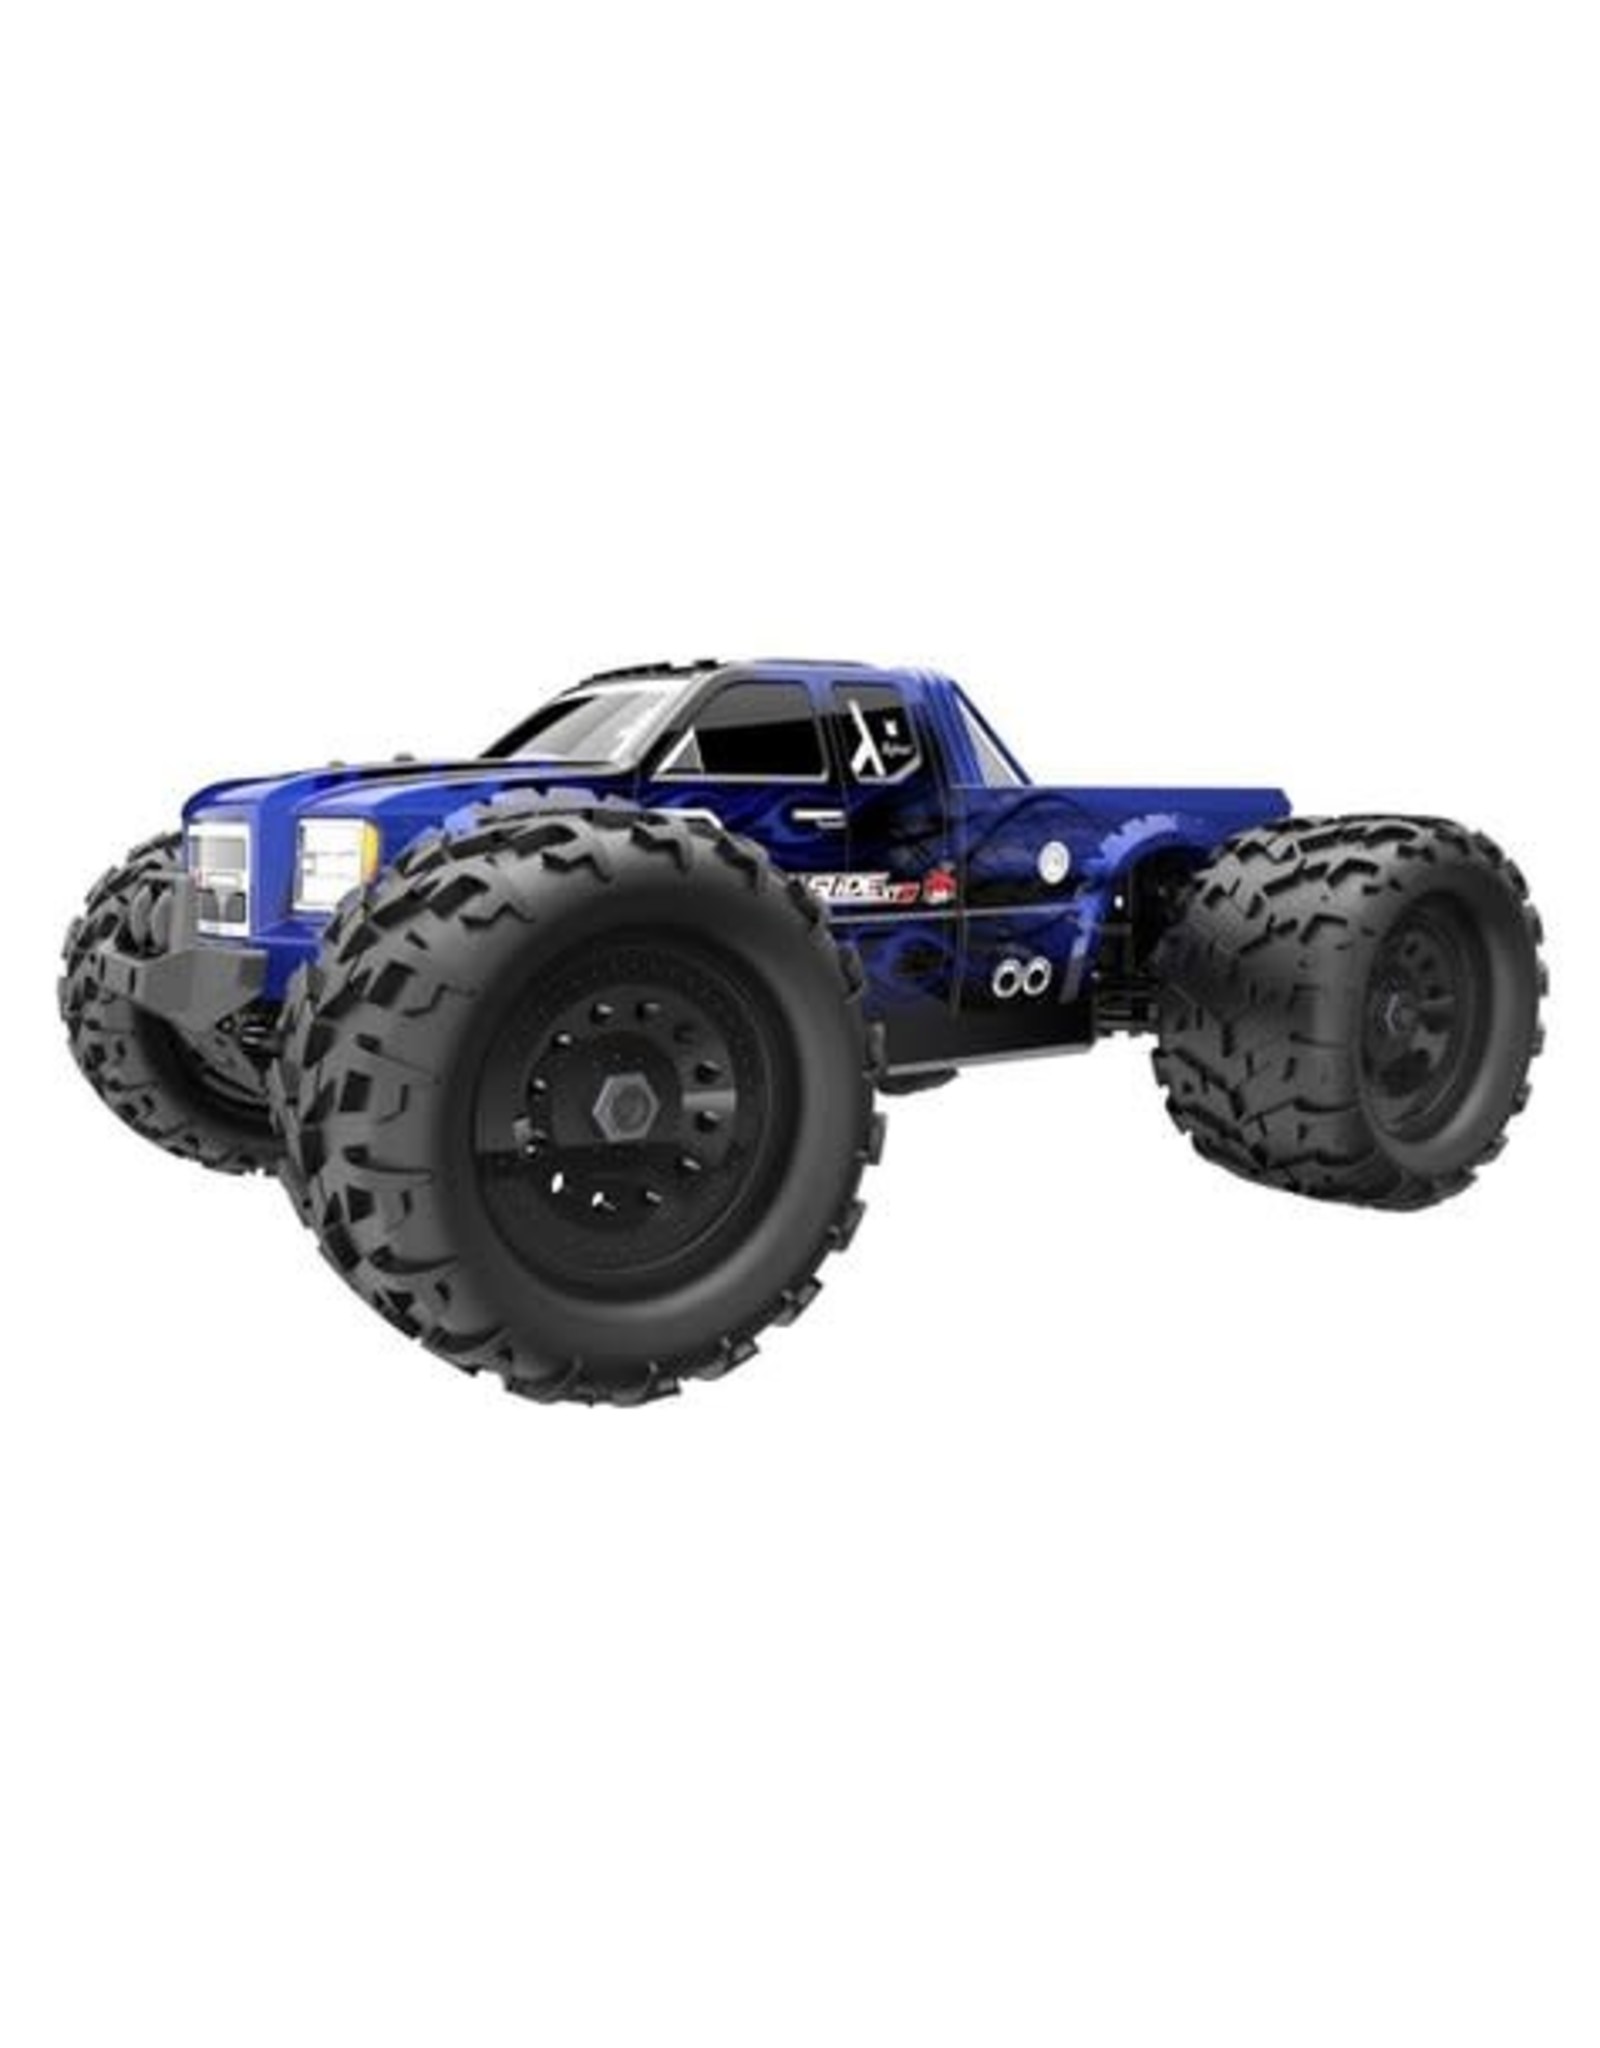 Redcat Racing Redcat Landslide XTE 1/8 Scale Brushless Electric Monster Truck